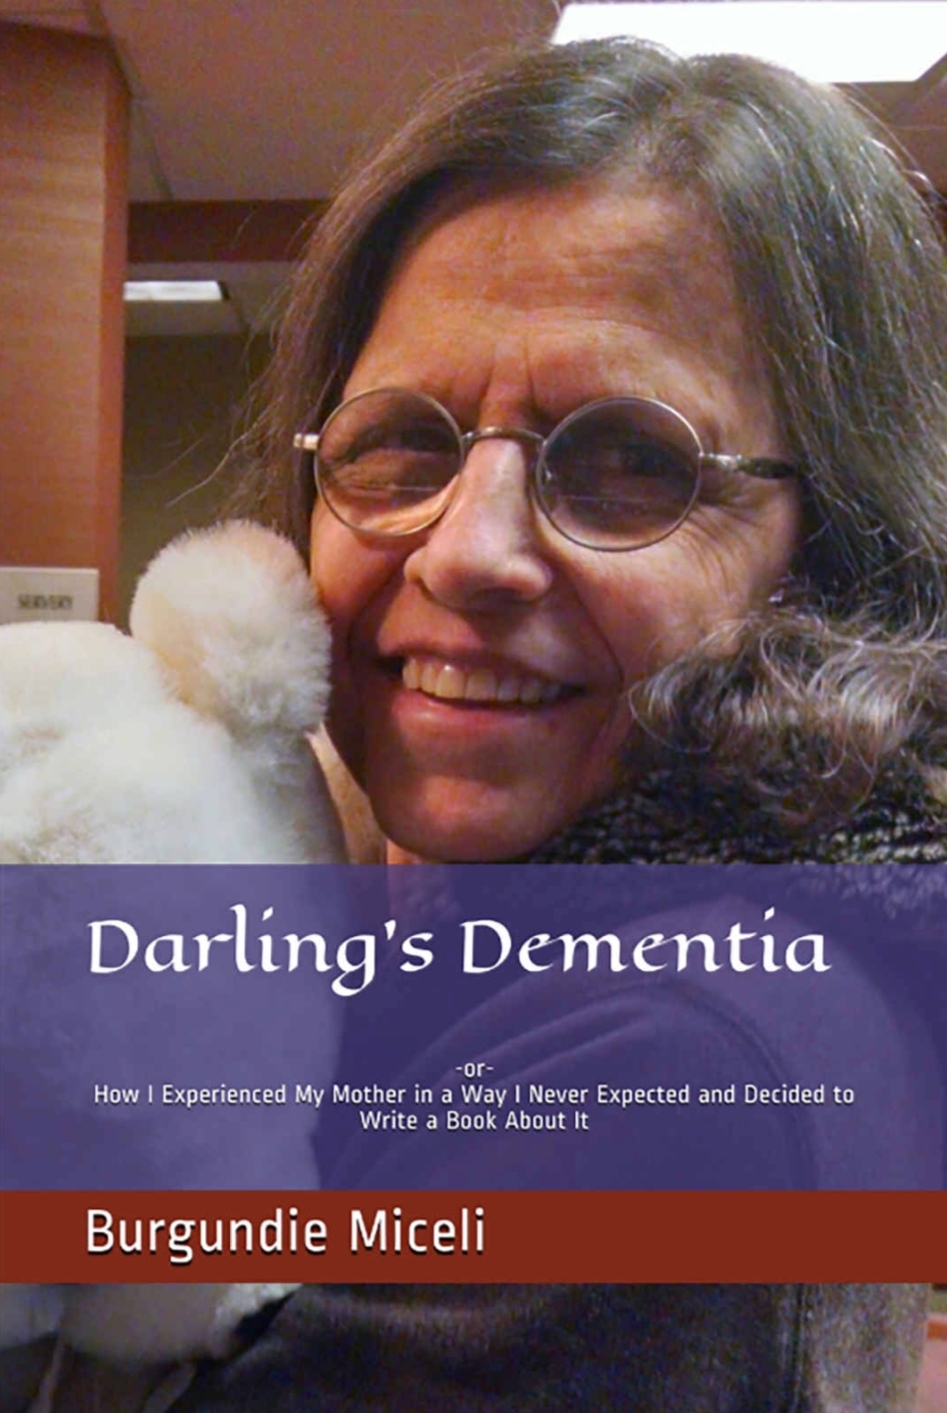 Darling’s Dementia: -or- How I Experienced My Mother in a Way I Never Expected and Decided to Write a Book About It  .  .